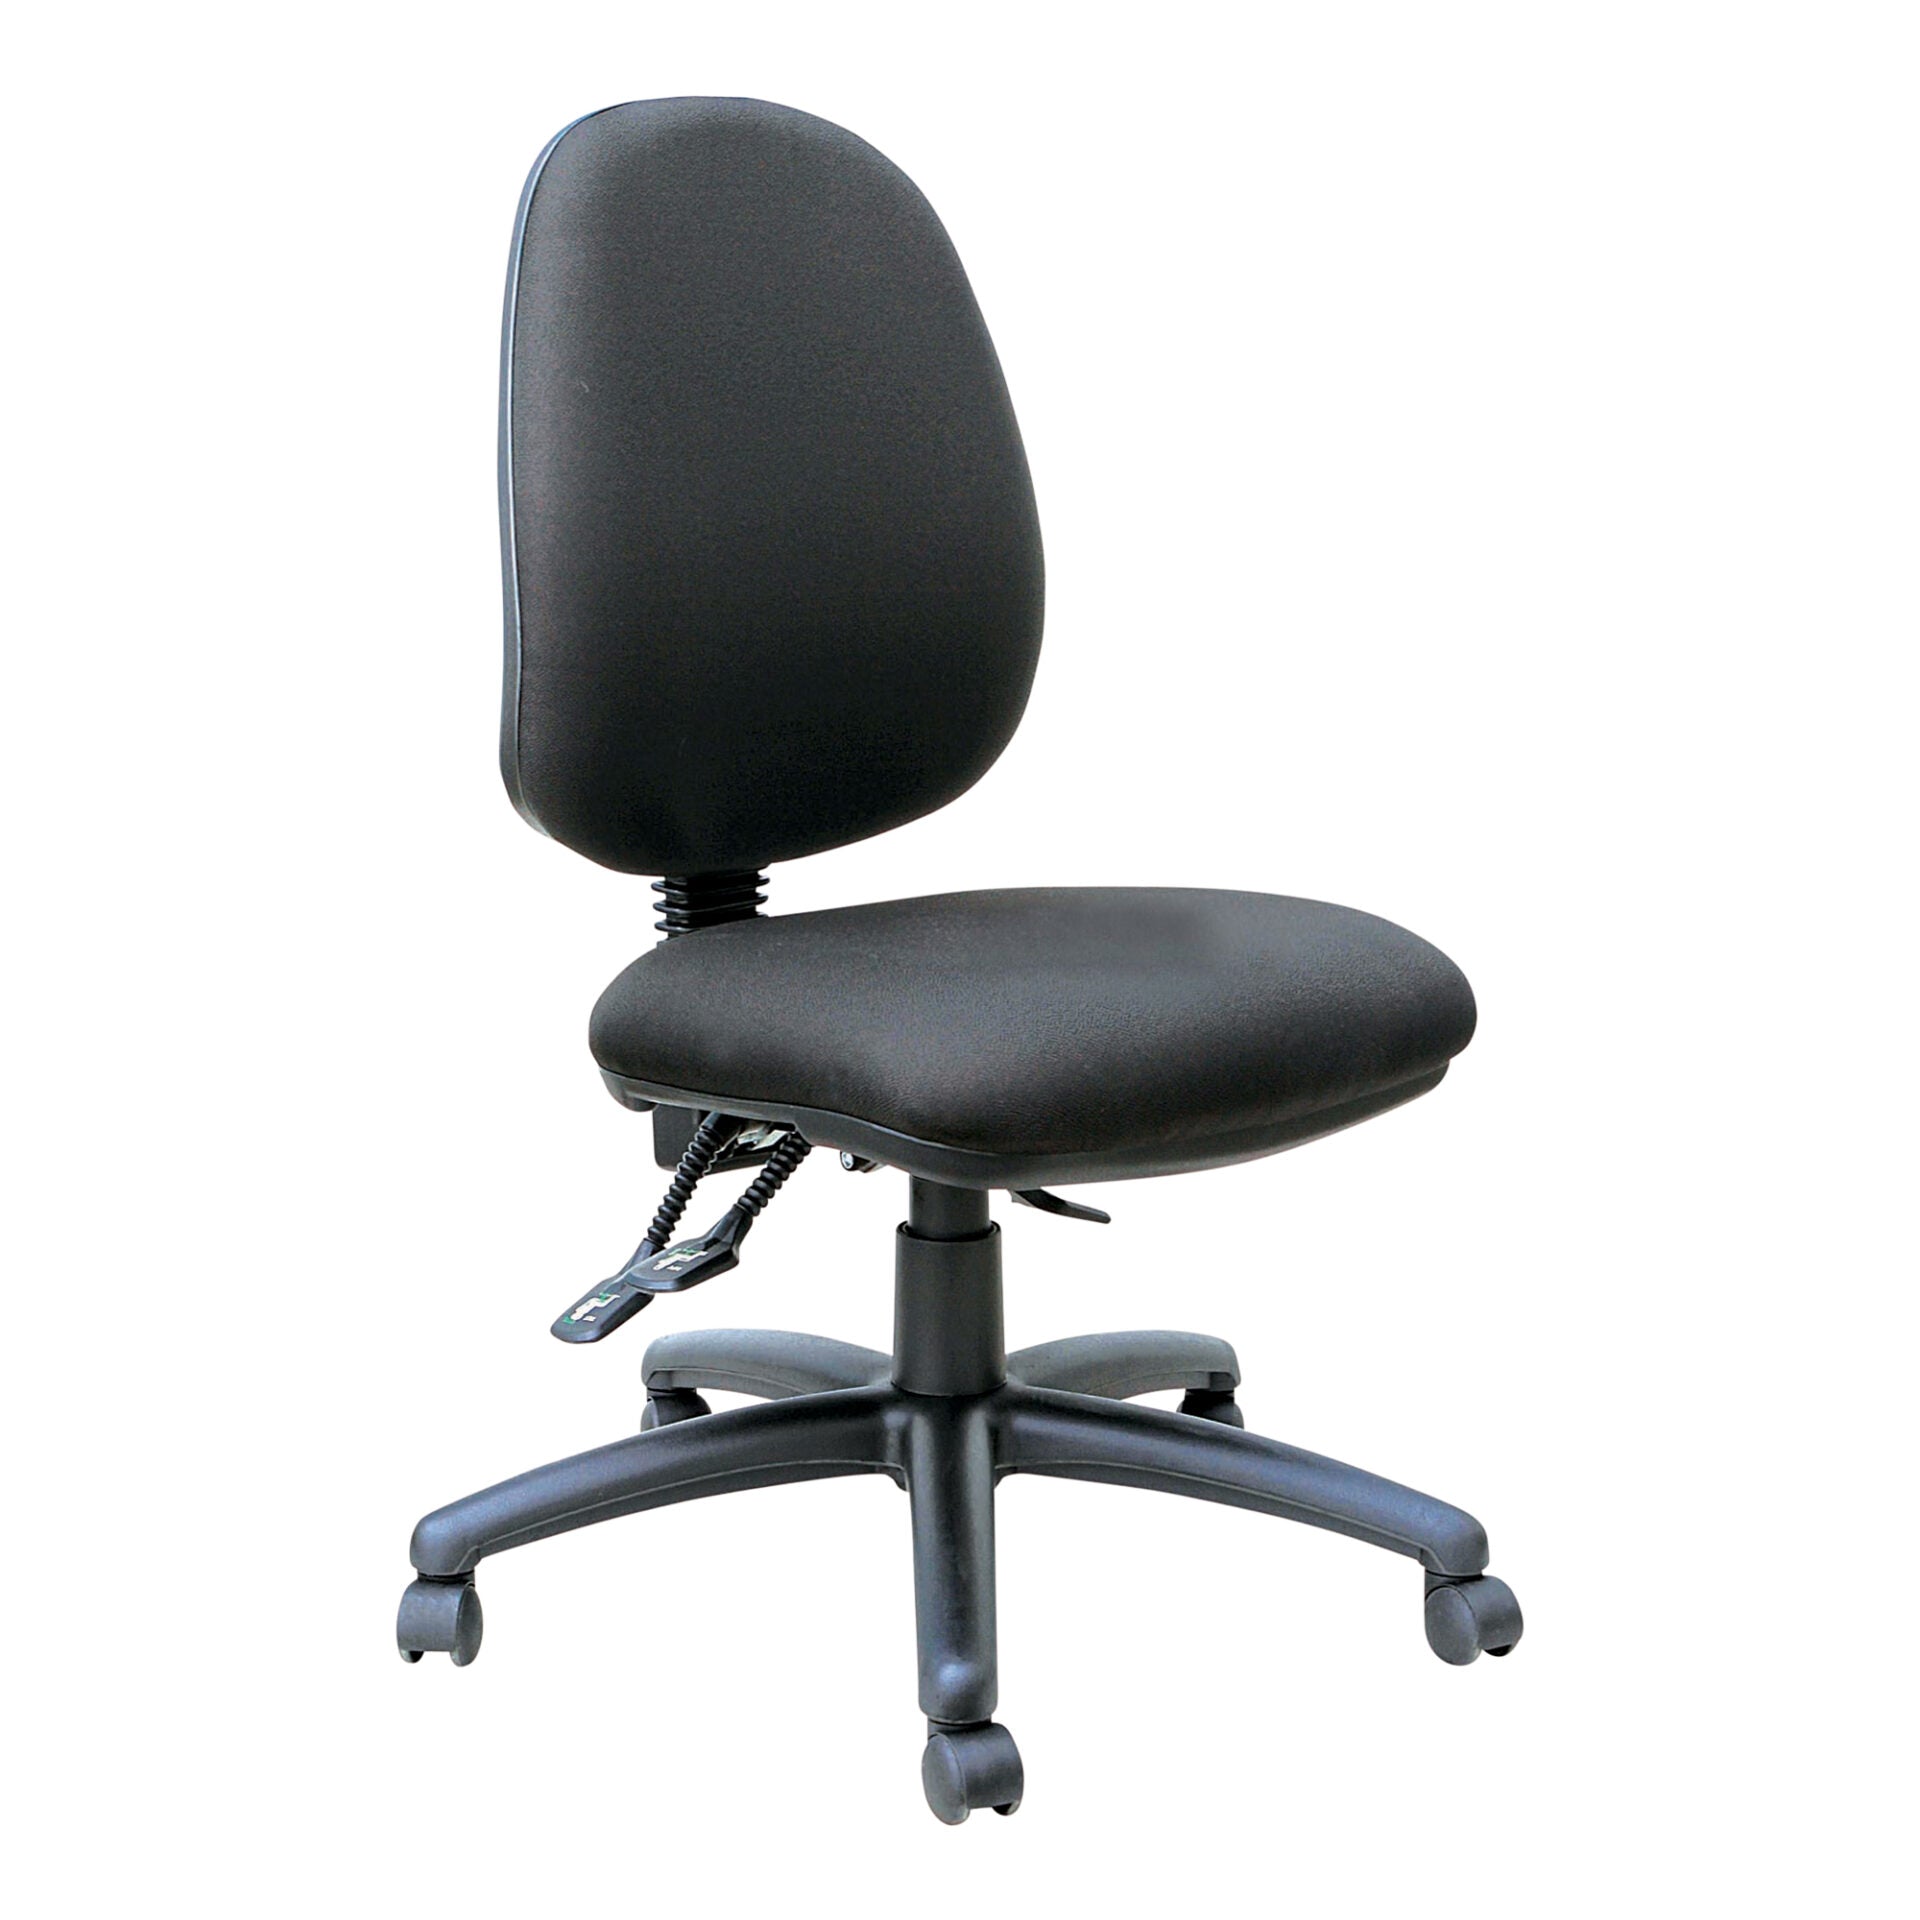 Mondo Java high-back task chair in black, front view.